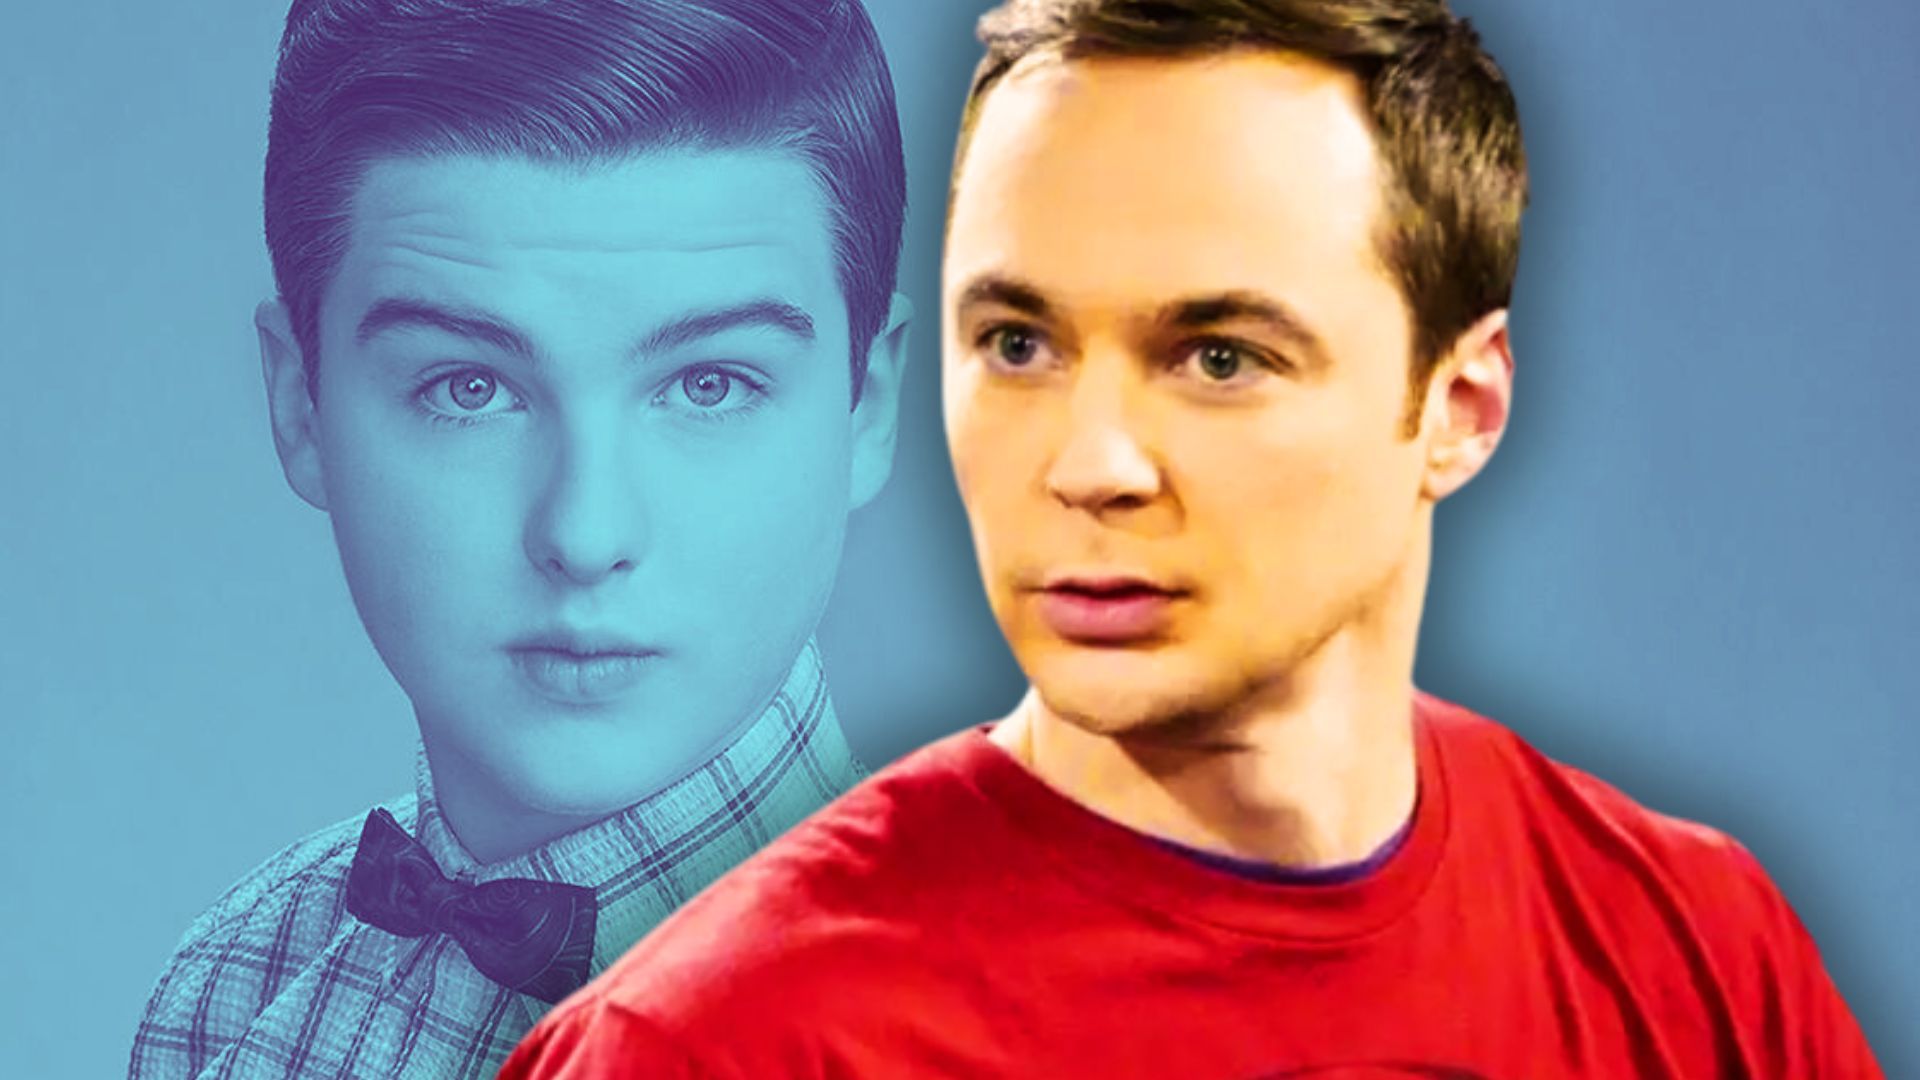 Sheldon Actors Iain Armitage and Jim Parsons Meet on the Set of Young Sheldon